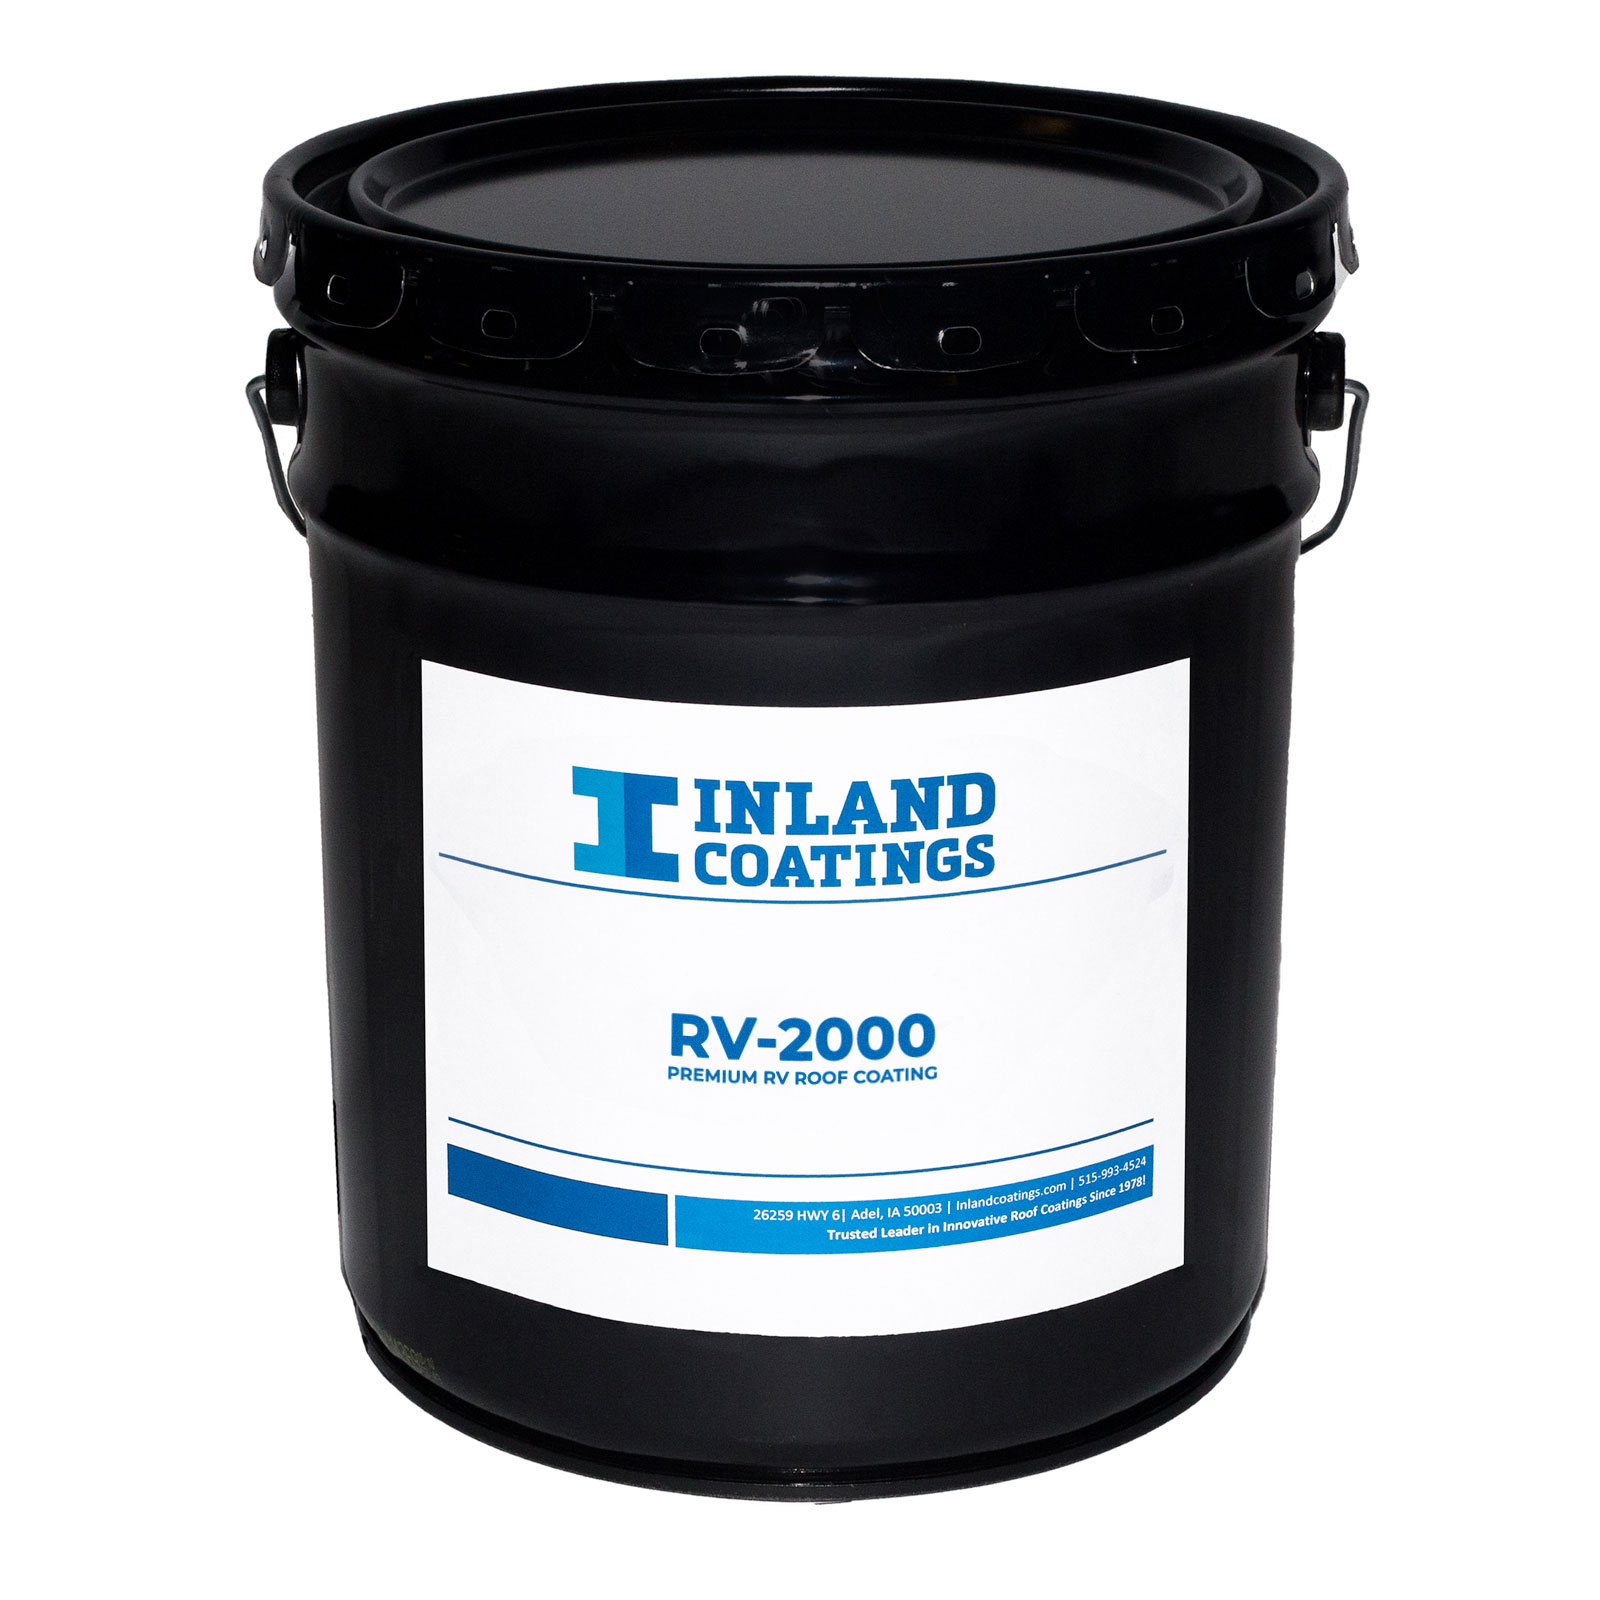 A bucket of Inland's RV-2000 Premium RV Roof Coating